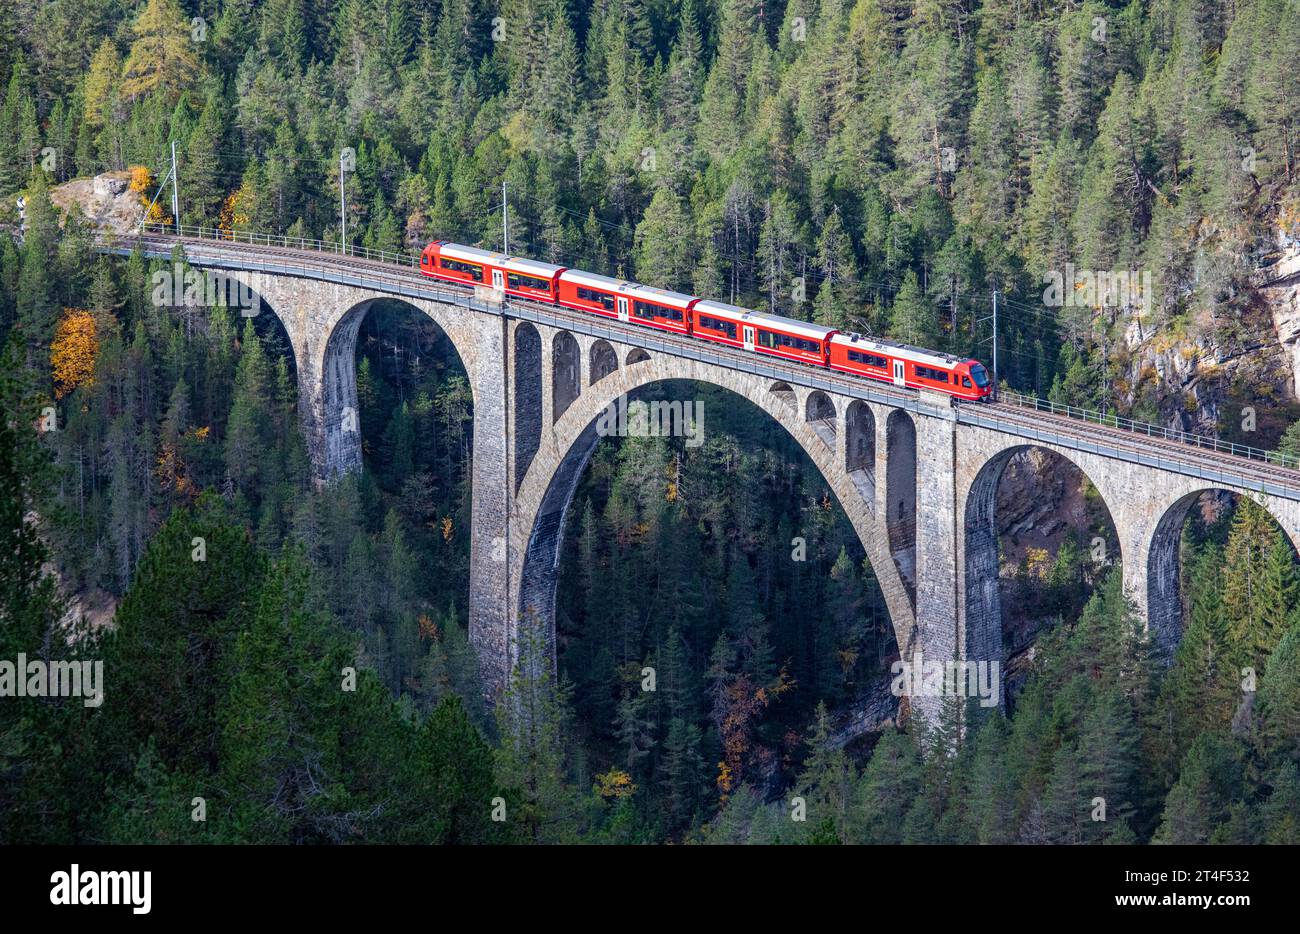 Davos Wiesen - October 2023: A red passenger train is crossing the famous Wiesener viaduct on the train line Davos - Filisur, the highest viaduct in s Stock Photo